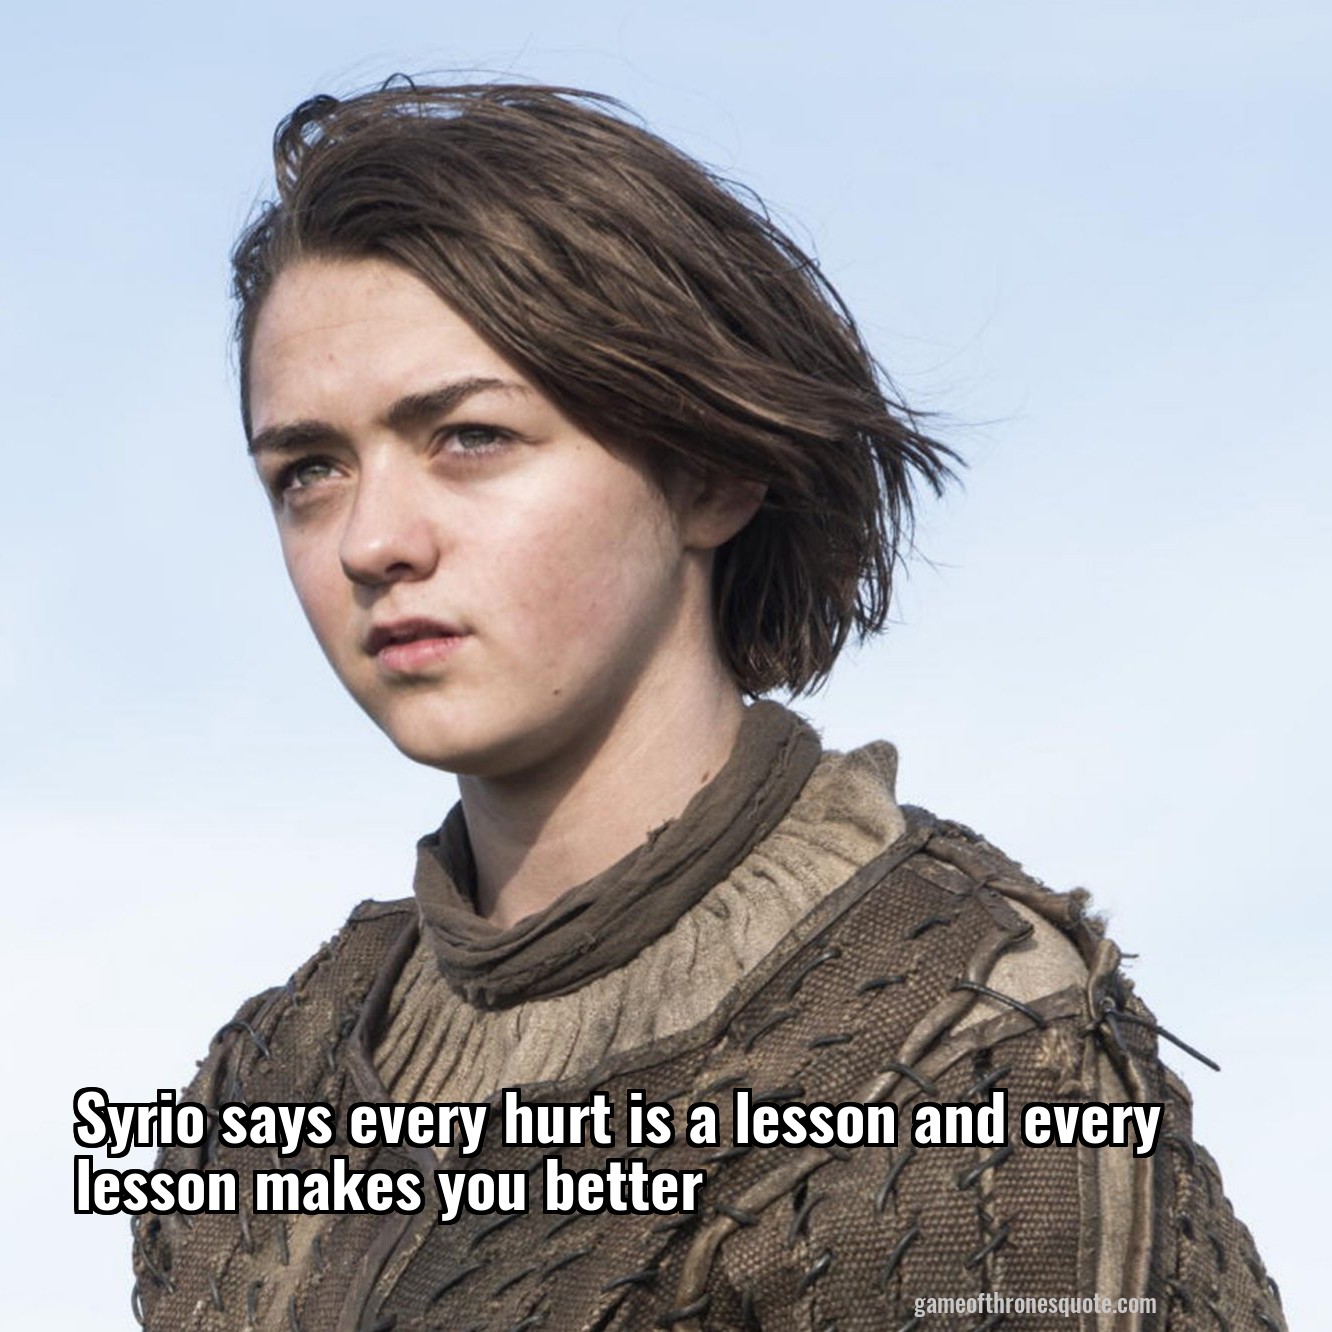 Syrio says every hurt is a lesson and every lesson makes you better